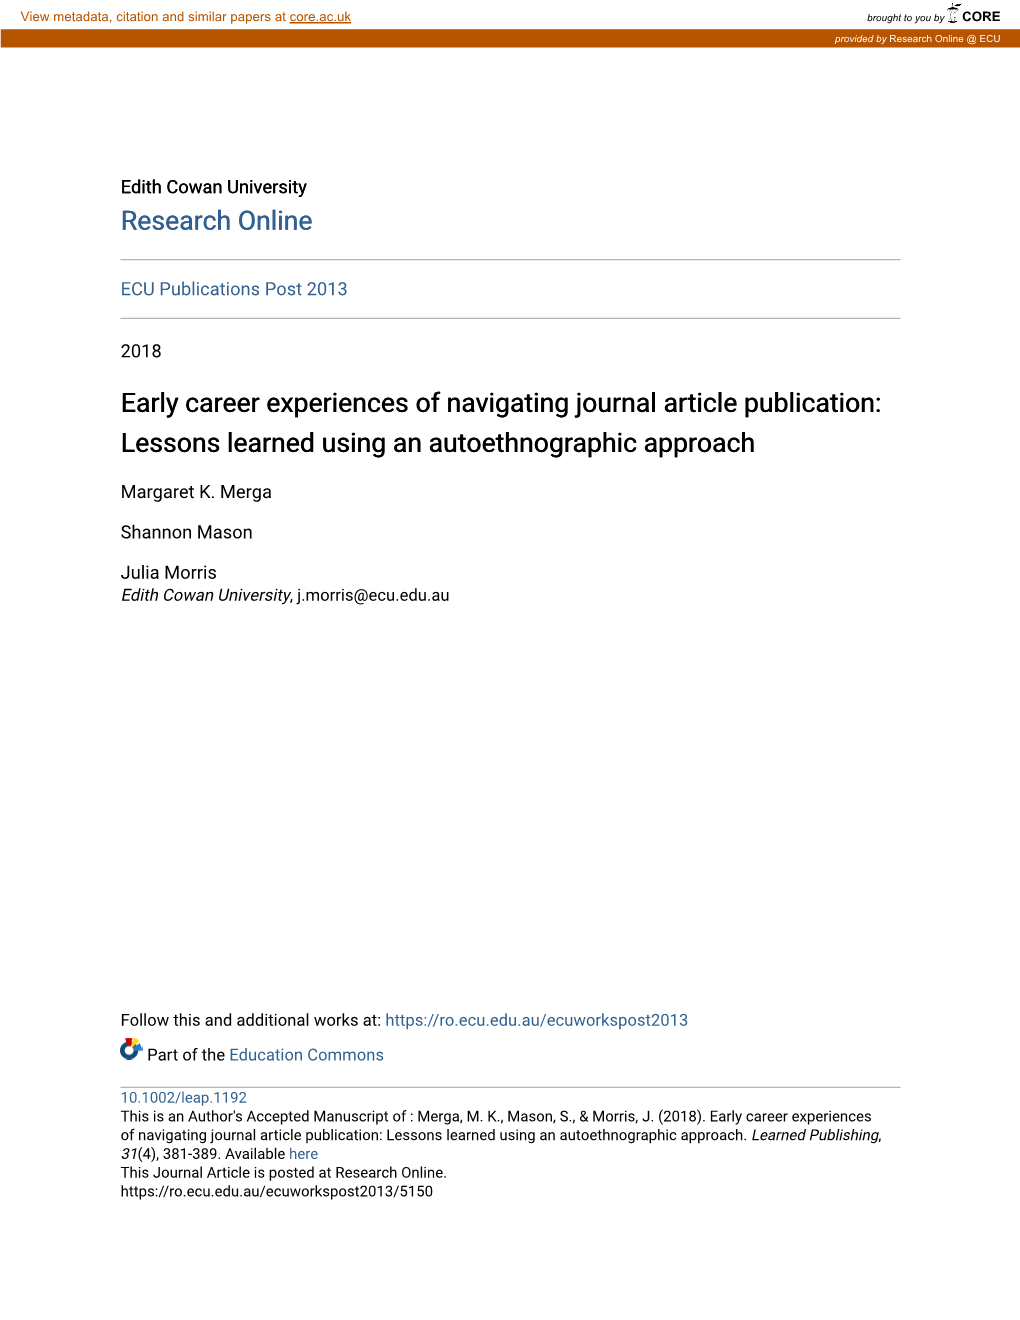 Early Career Experiences of Navigating Journal Article Publication: Lessons Learned Using an Autoethnographic Approach